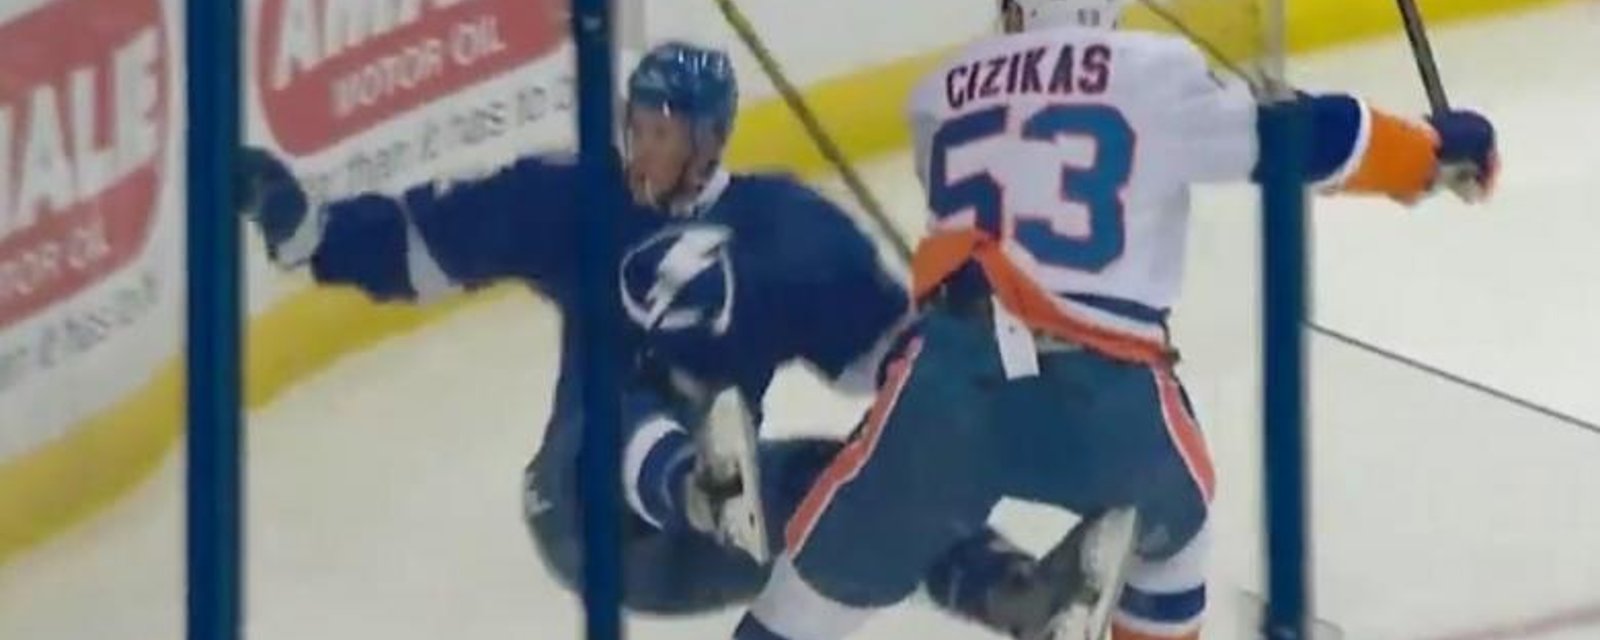 Cizikis destroys Condra with a crushing hit into the boards.